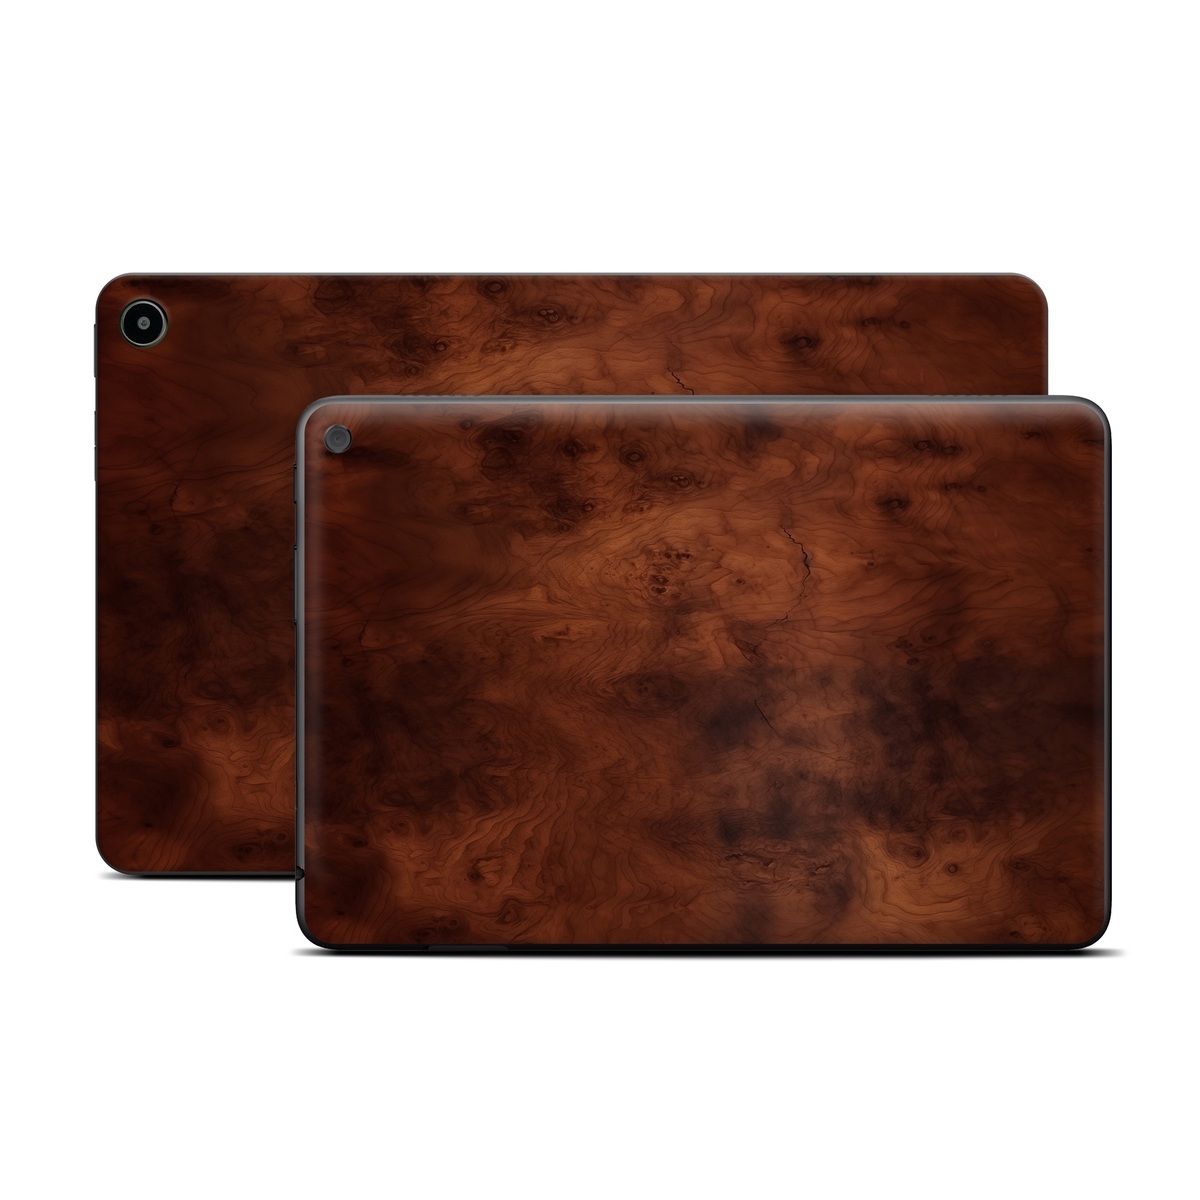 Amazon Fire Tablet Series Skin Skin design of Brown, Wood, Rectangle, Beige, Tints and shades, Flooring, Art, Hardwood, Pattern, Peach, with brown, black colors